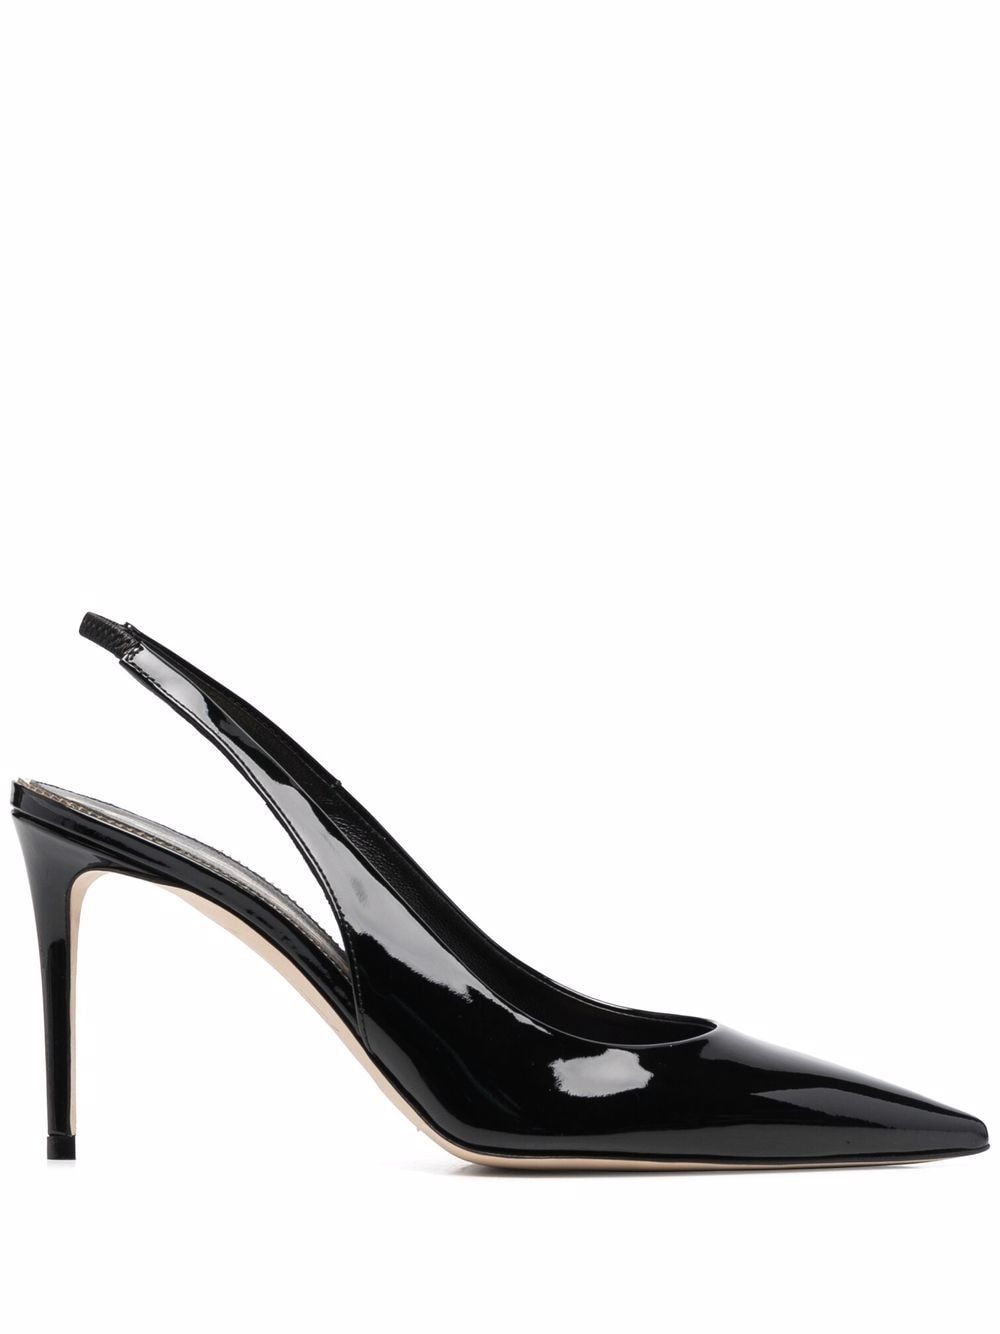 Image 1 of Scarosso x Brian Atwood Sutton slingback pumps